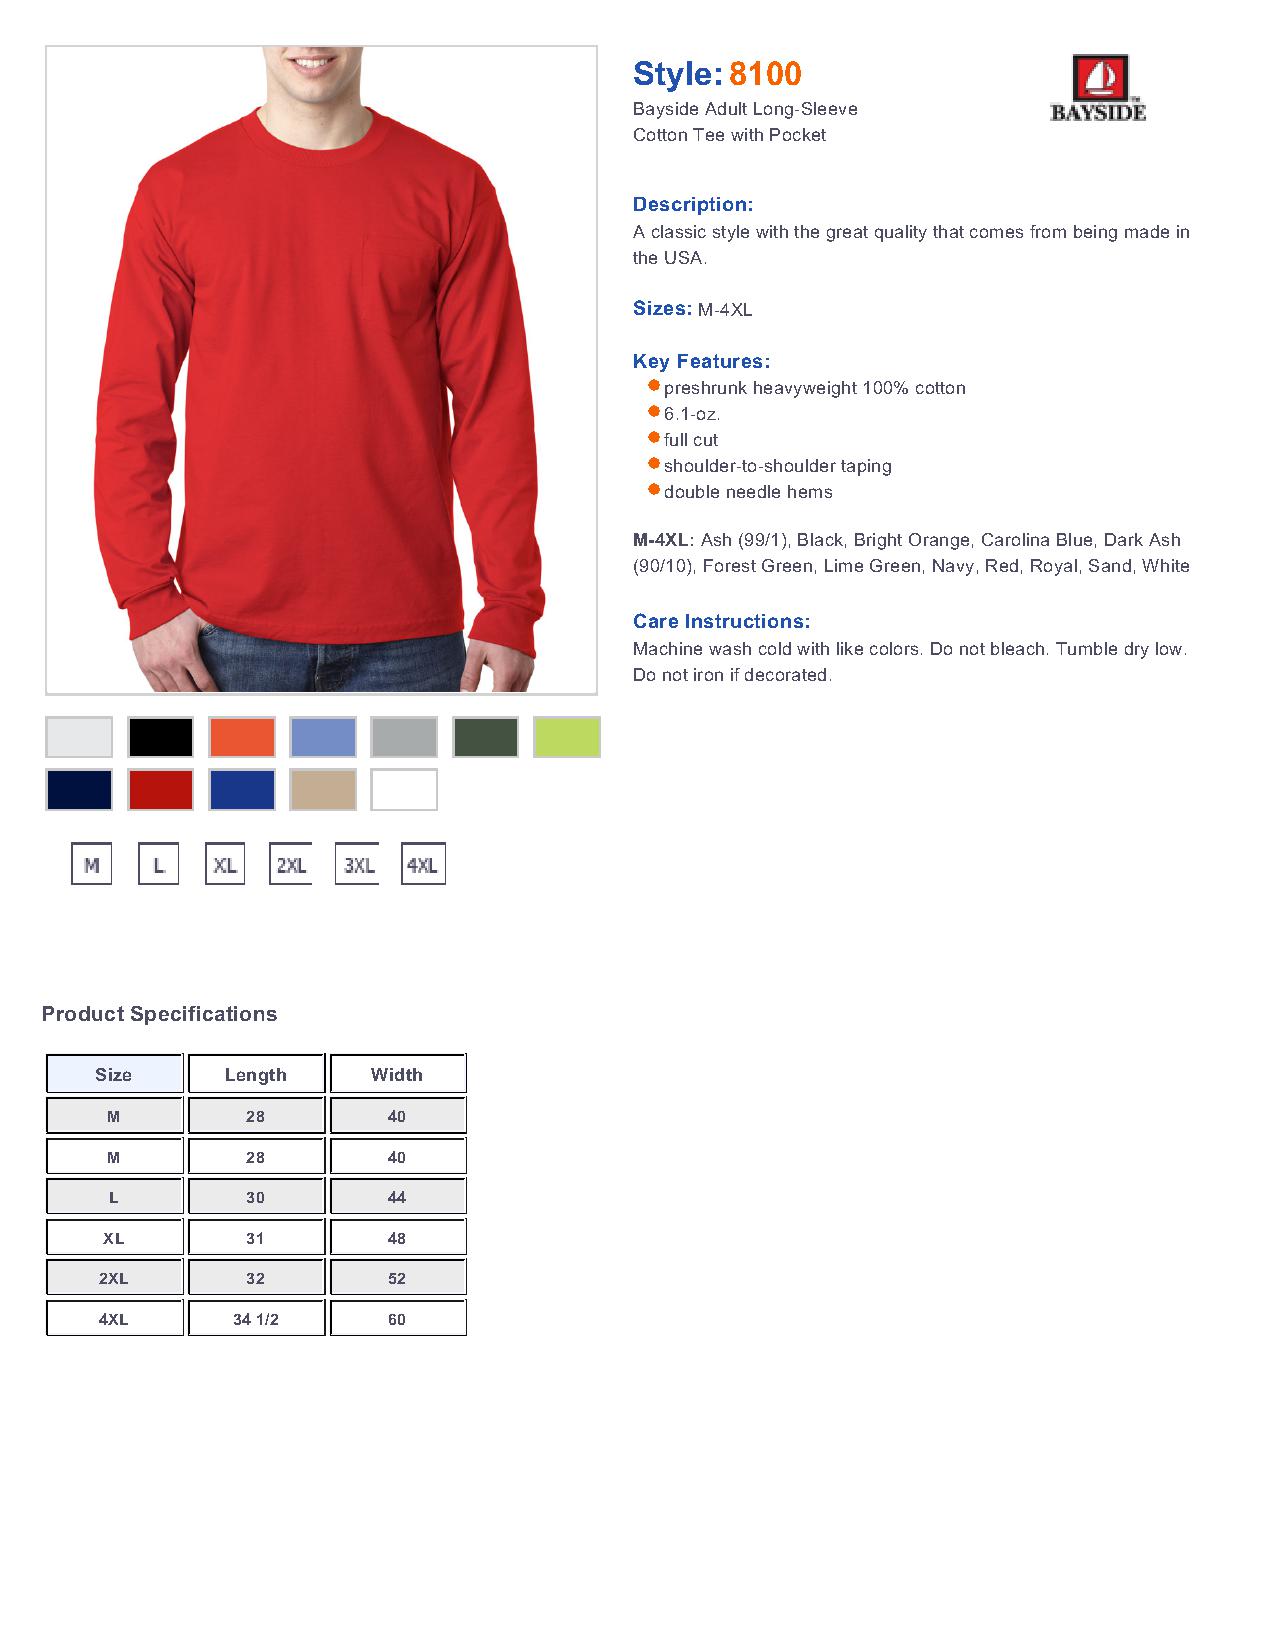 Bayside 8100 Long Sleeve T-Shirt with a Pocket $15.24 - T-Shirts